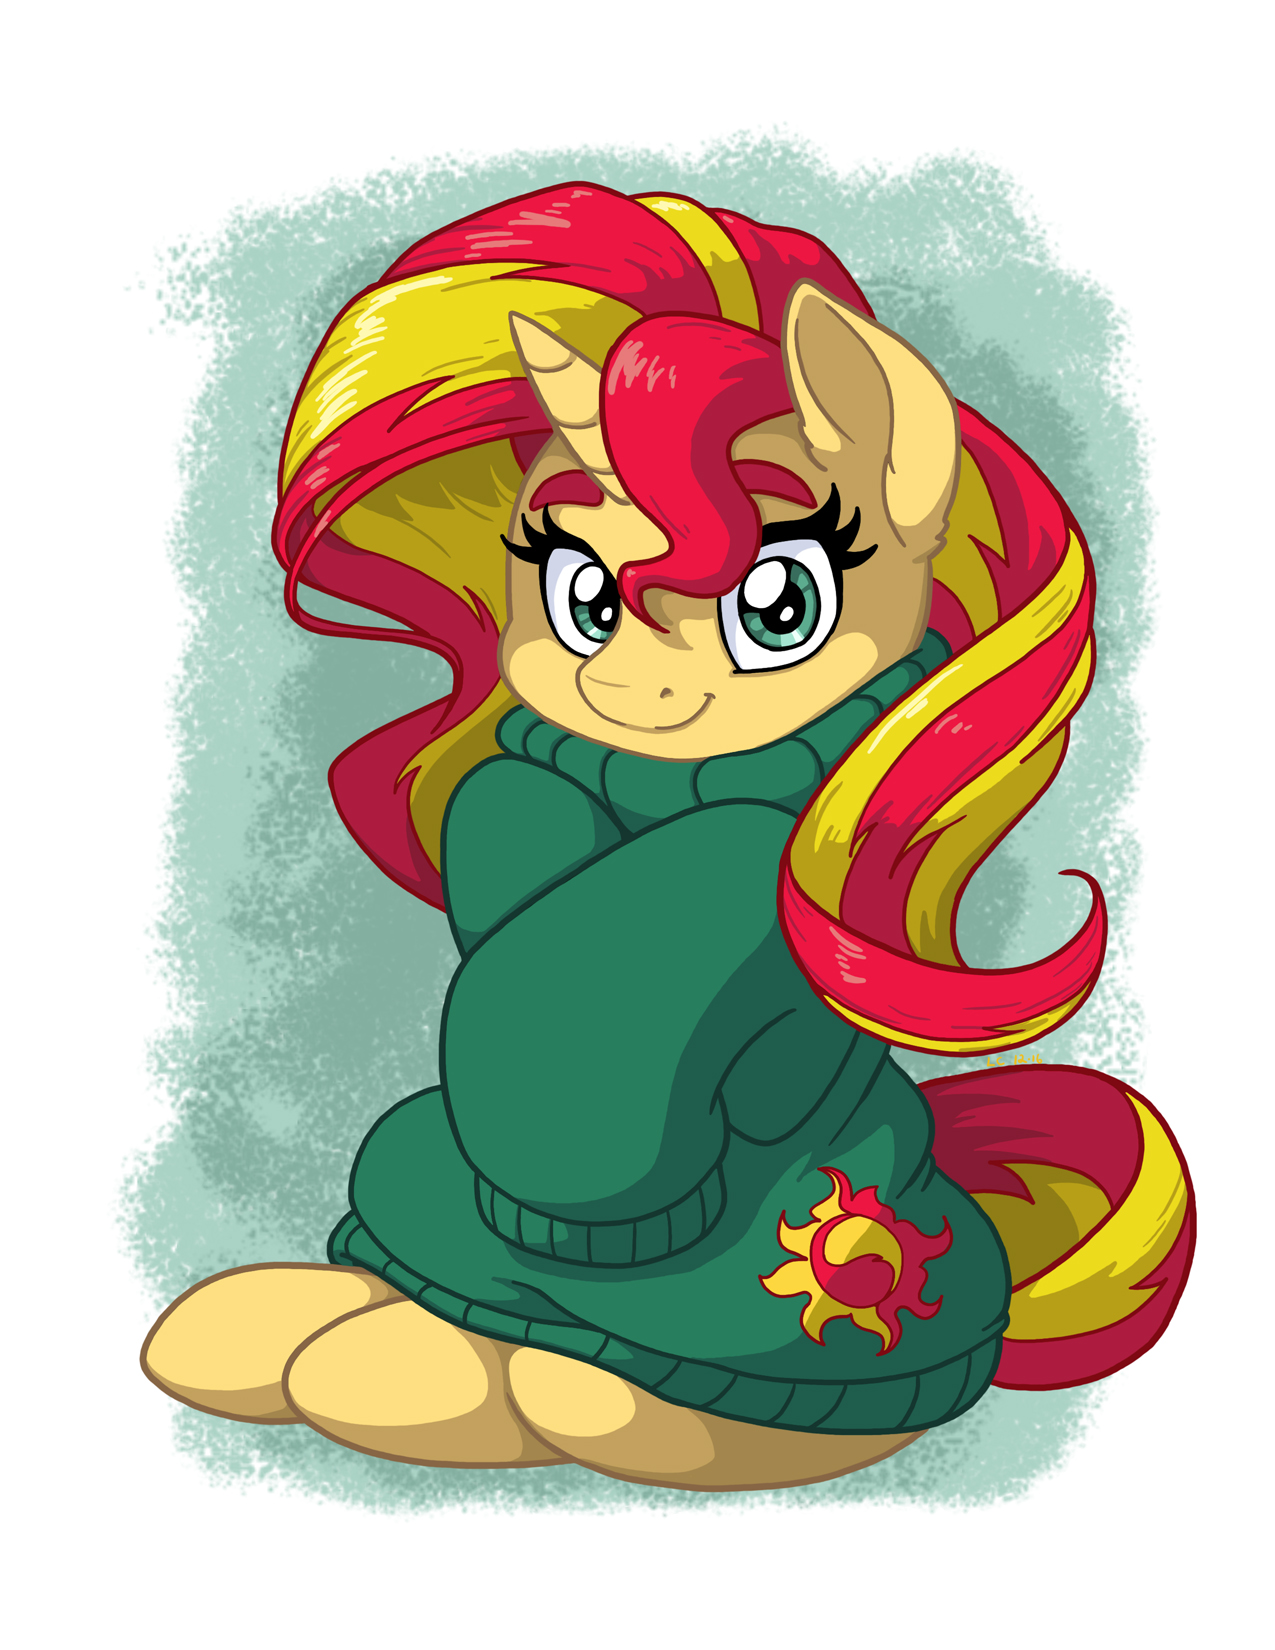 Sunset Shimmer in Over-sized Sweater